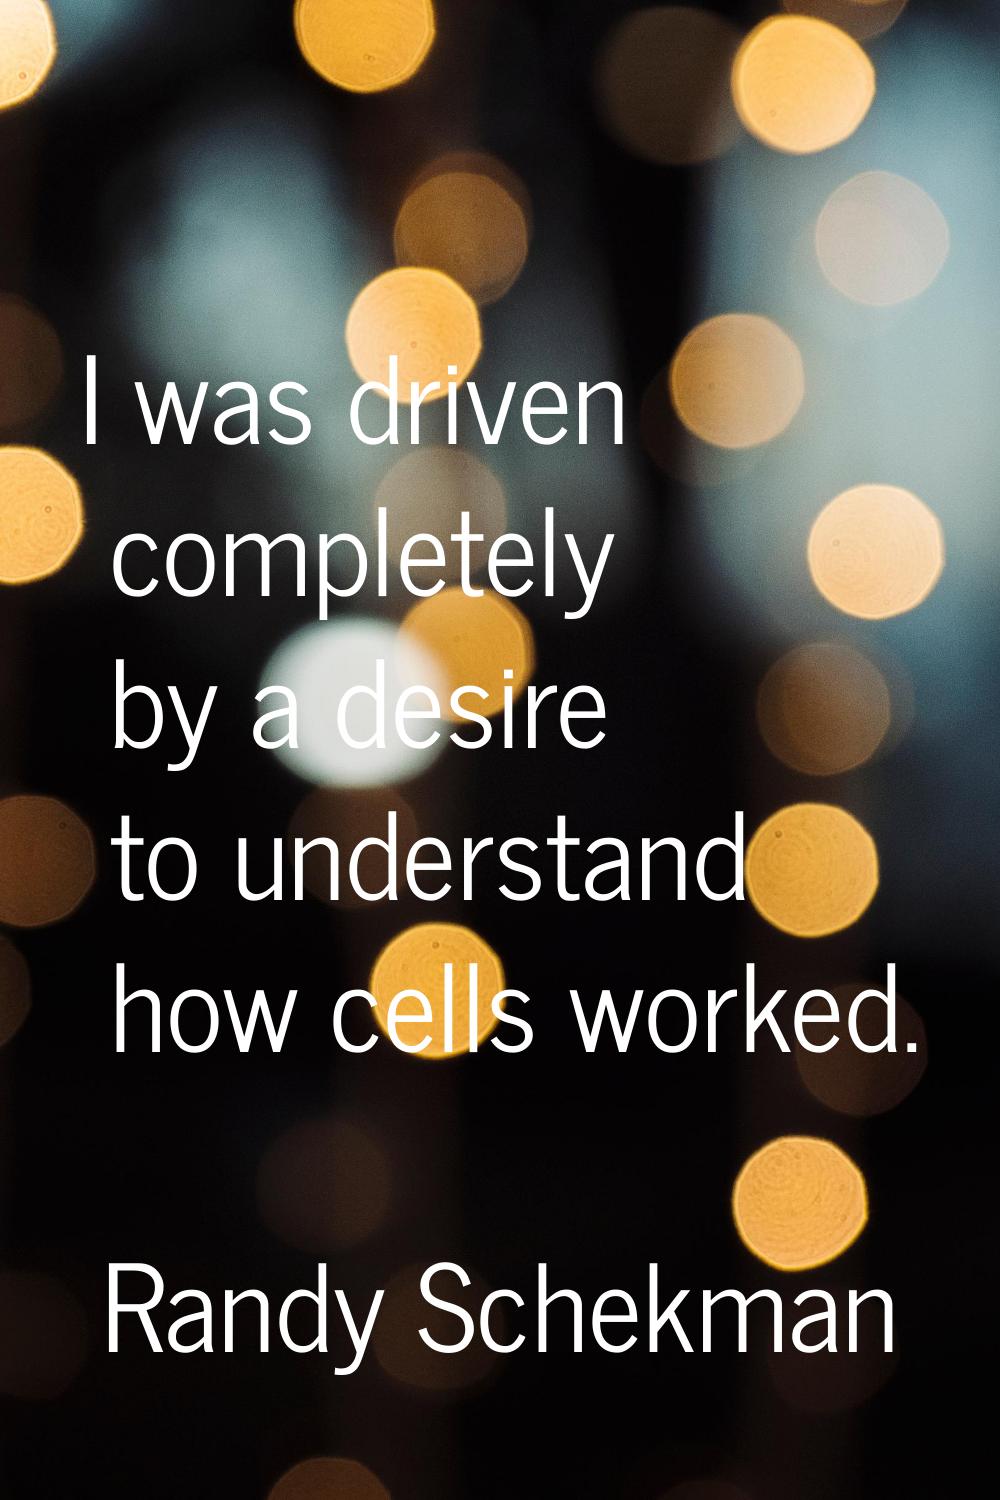 I was driven completely by a desire to understand how cells worked.